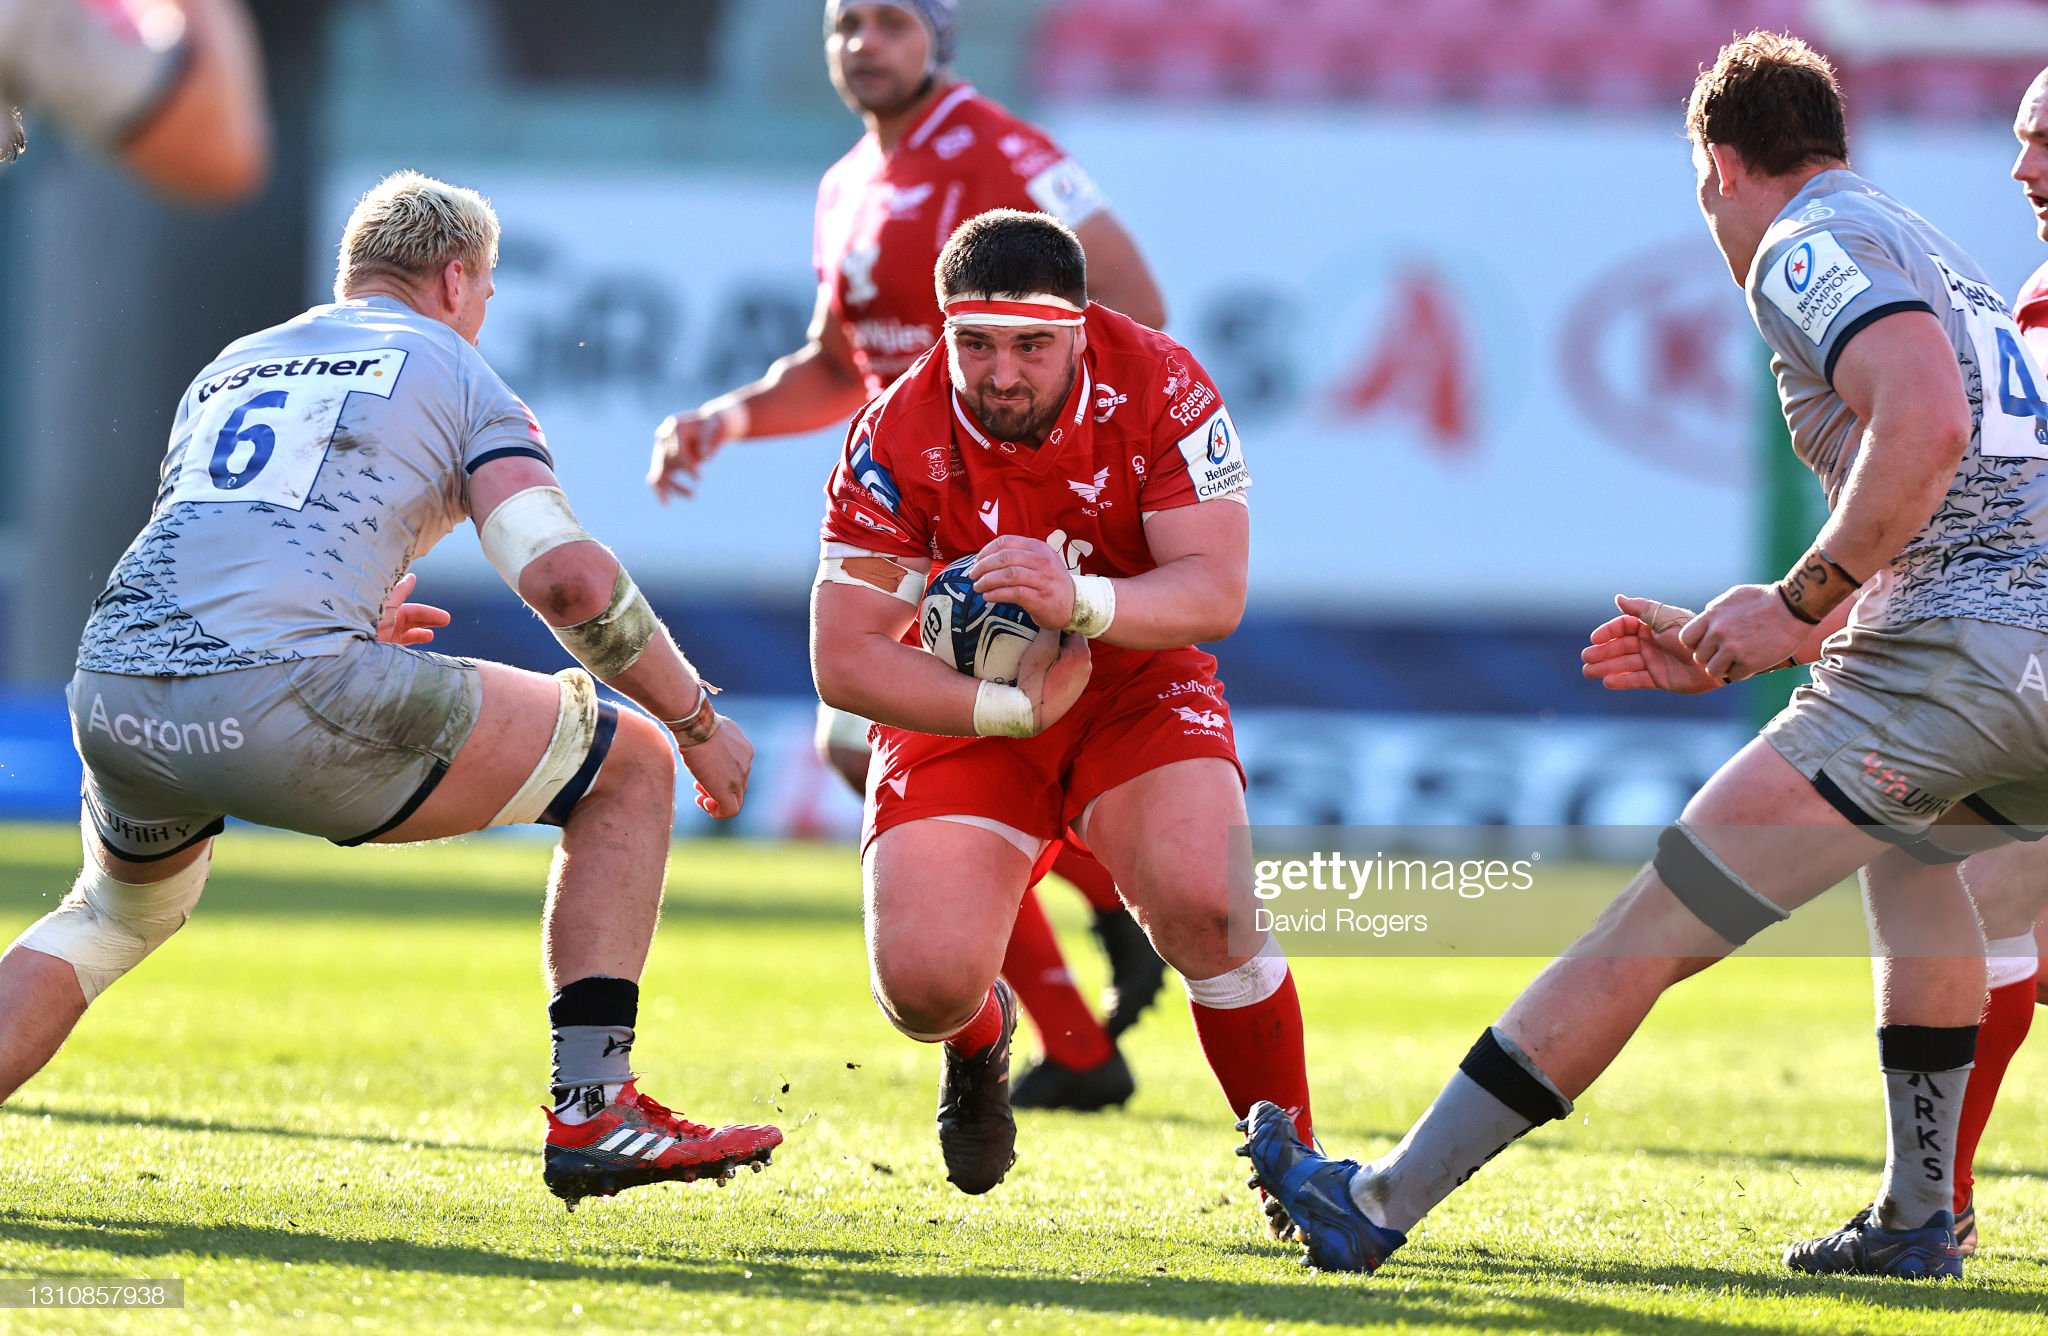 Dwayne Peel Has Defied All The Odds Says Wales Prop Wyn Jones As Scarlets Get Ready For Euro D-Day